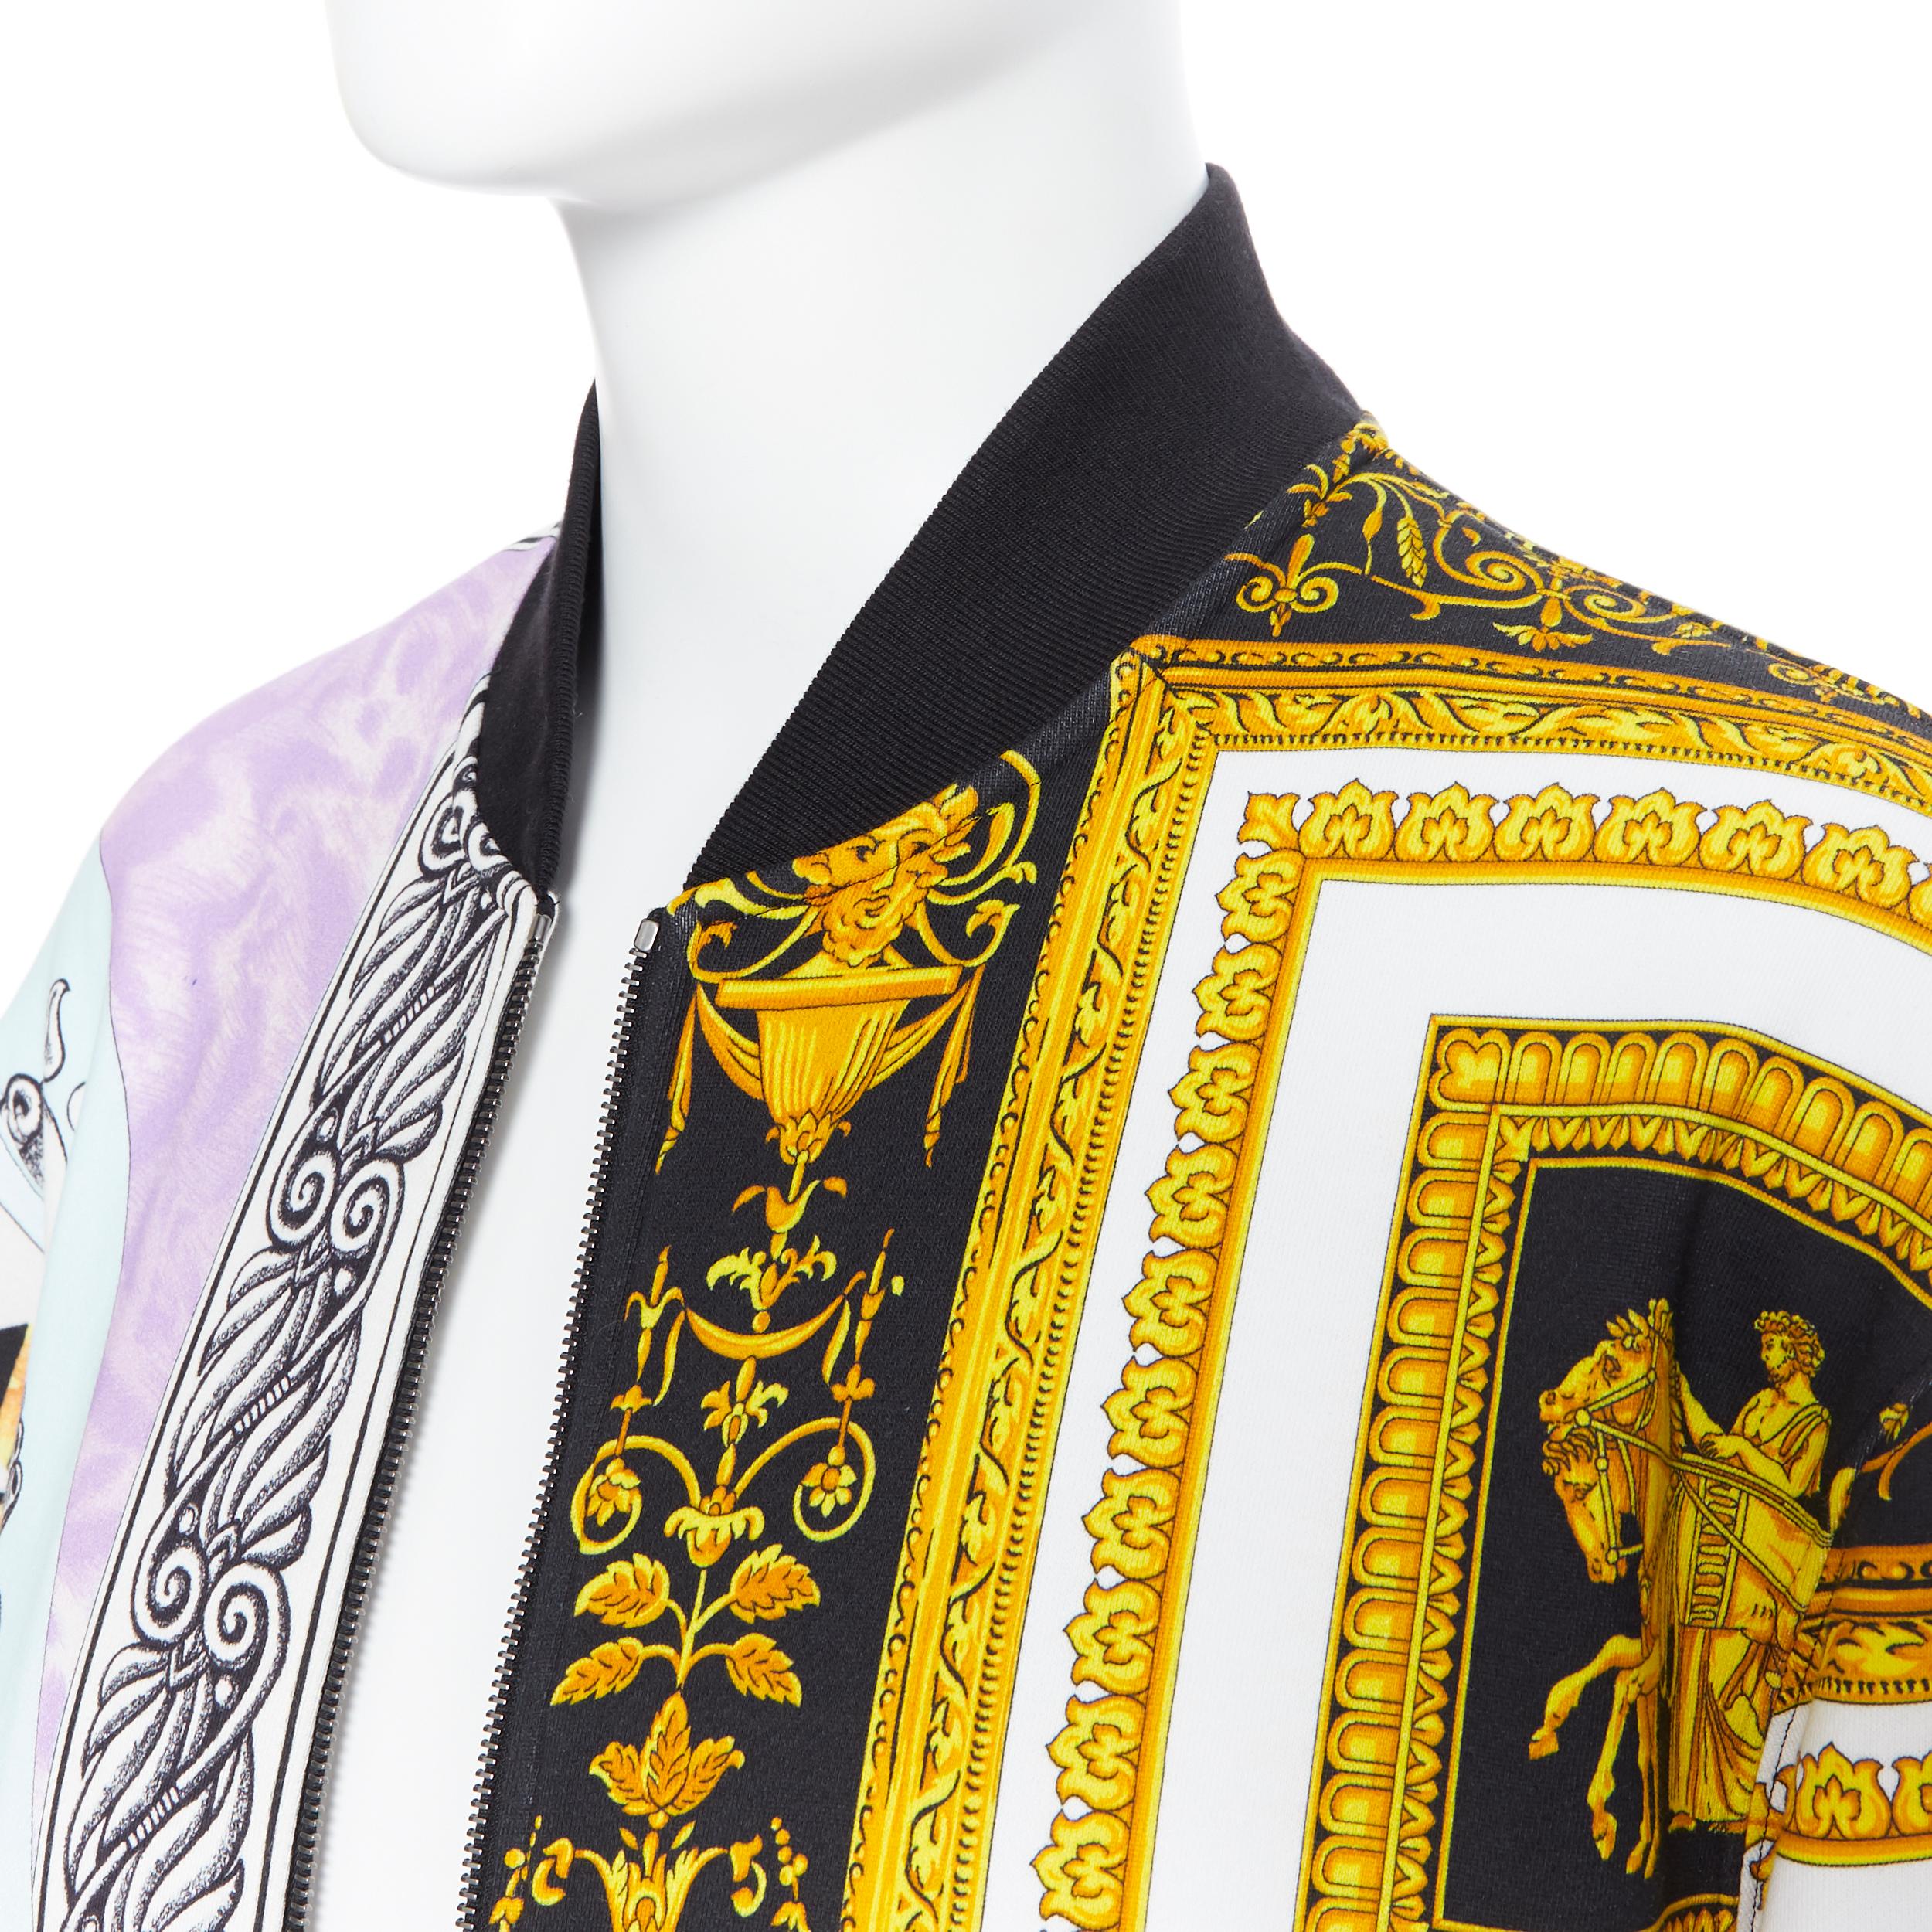 new VERSACE SS18 mixed gold baroque pastel face print zip up bomber jacket XXL
Brand: Versace
Designer: Donatella Versace
Collection: Spring Summer 2018
Model Name / Style: Cotton bomber
Material: Cotton
Color: Multicolour
Pattern: Other; mixed